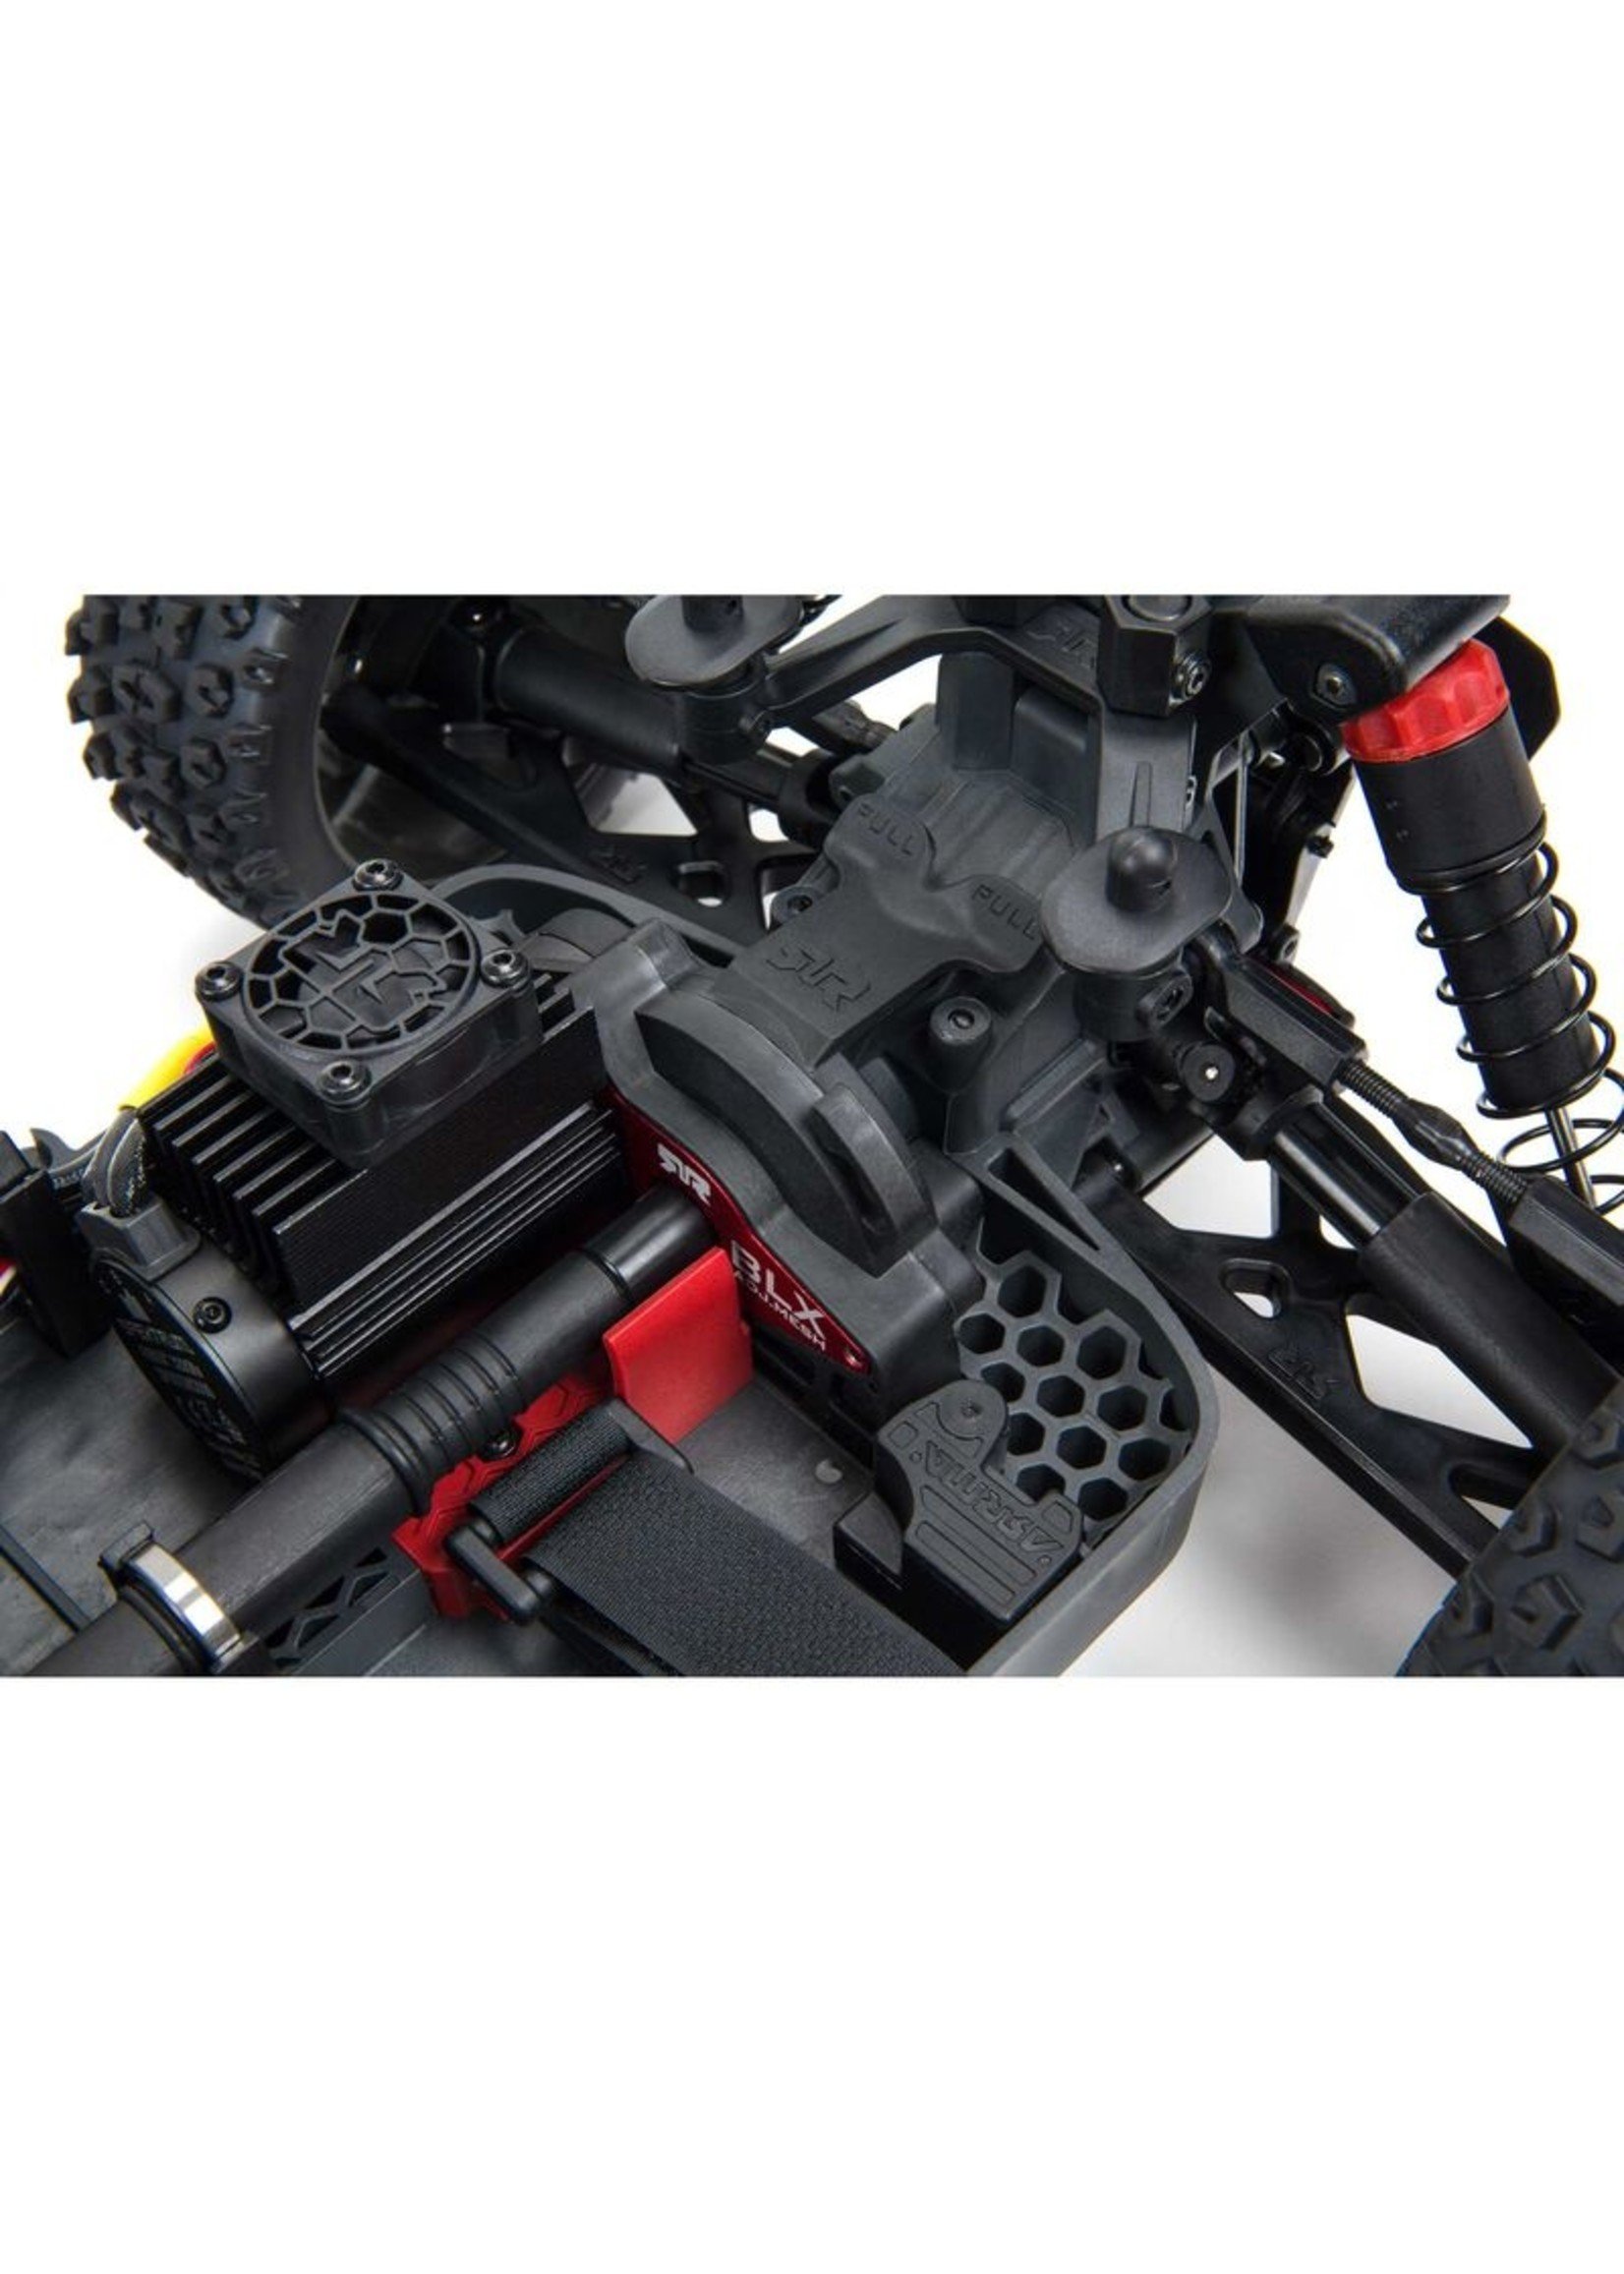 Arrma 1/8 Typhon 3S BLX V3 4WD Brushless Buggy RTR - Red